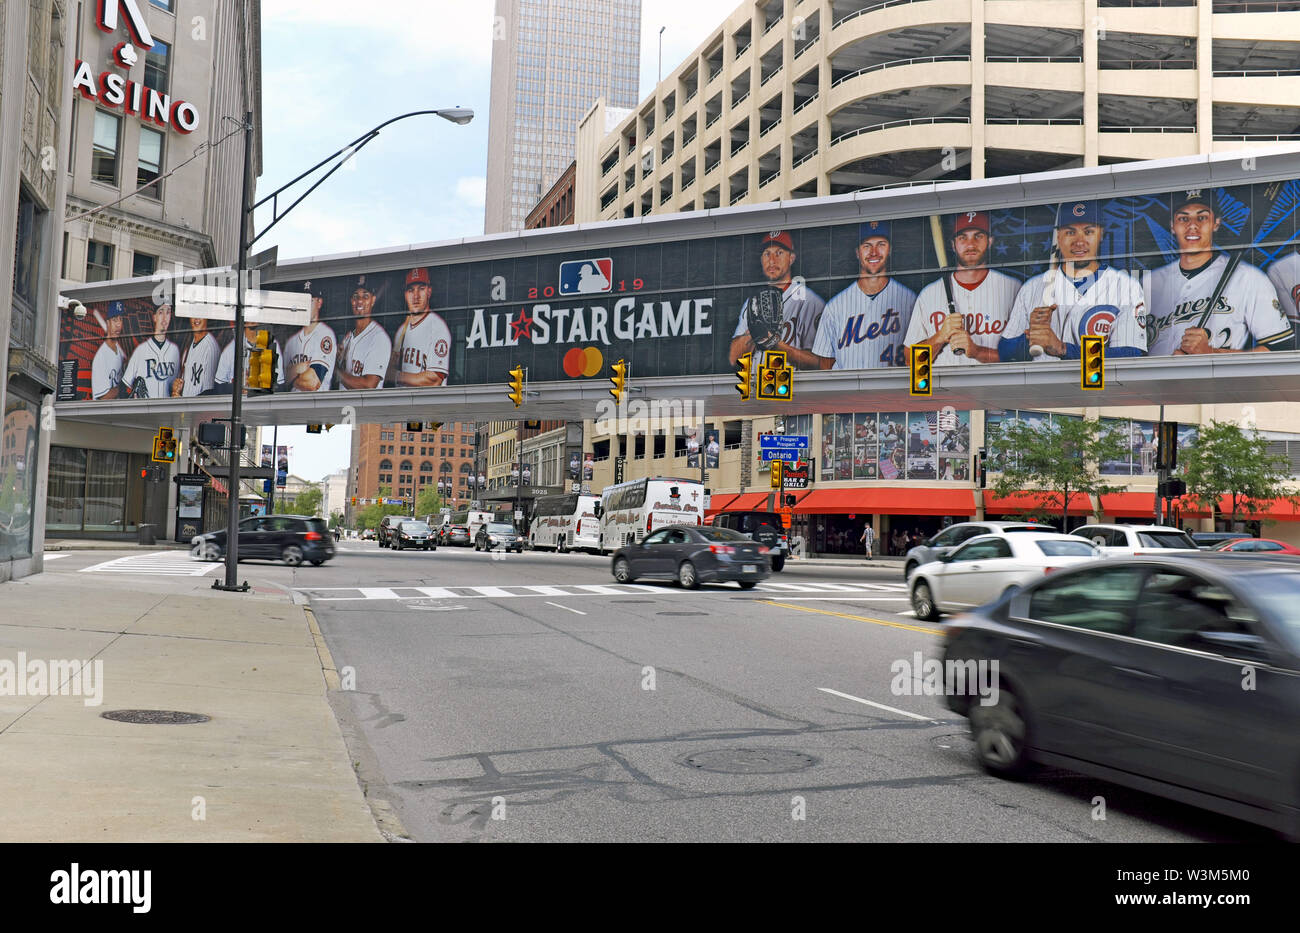 The 2019 All Star Game in Cleveland, Ohio, USA is promoted on the walkway across Ontario and Prospect streets in downtown Cleveland. Stock Photo